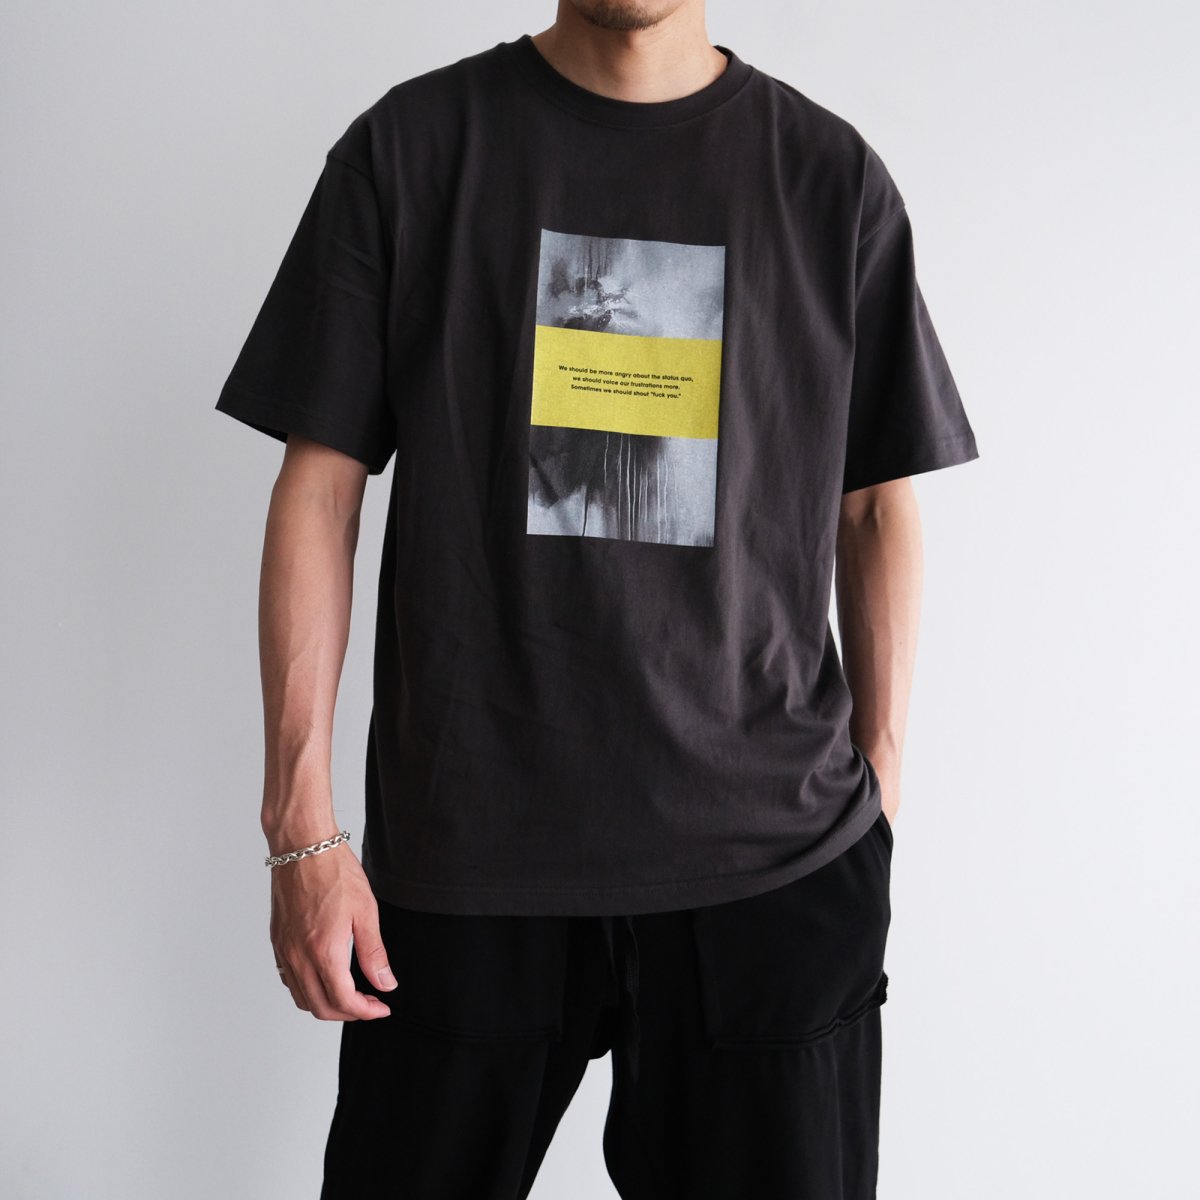 POET MEETS DUBWISE"YELLOW ON PAINTING" T-SHIRT